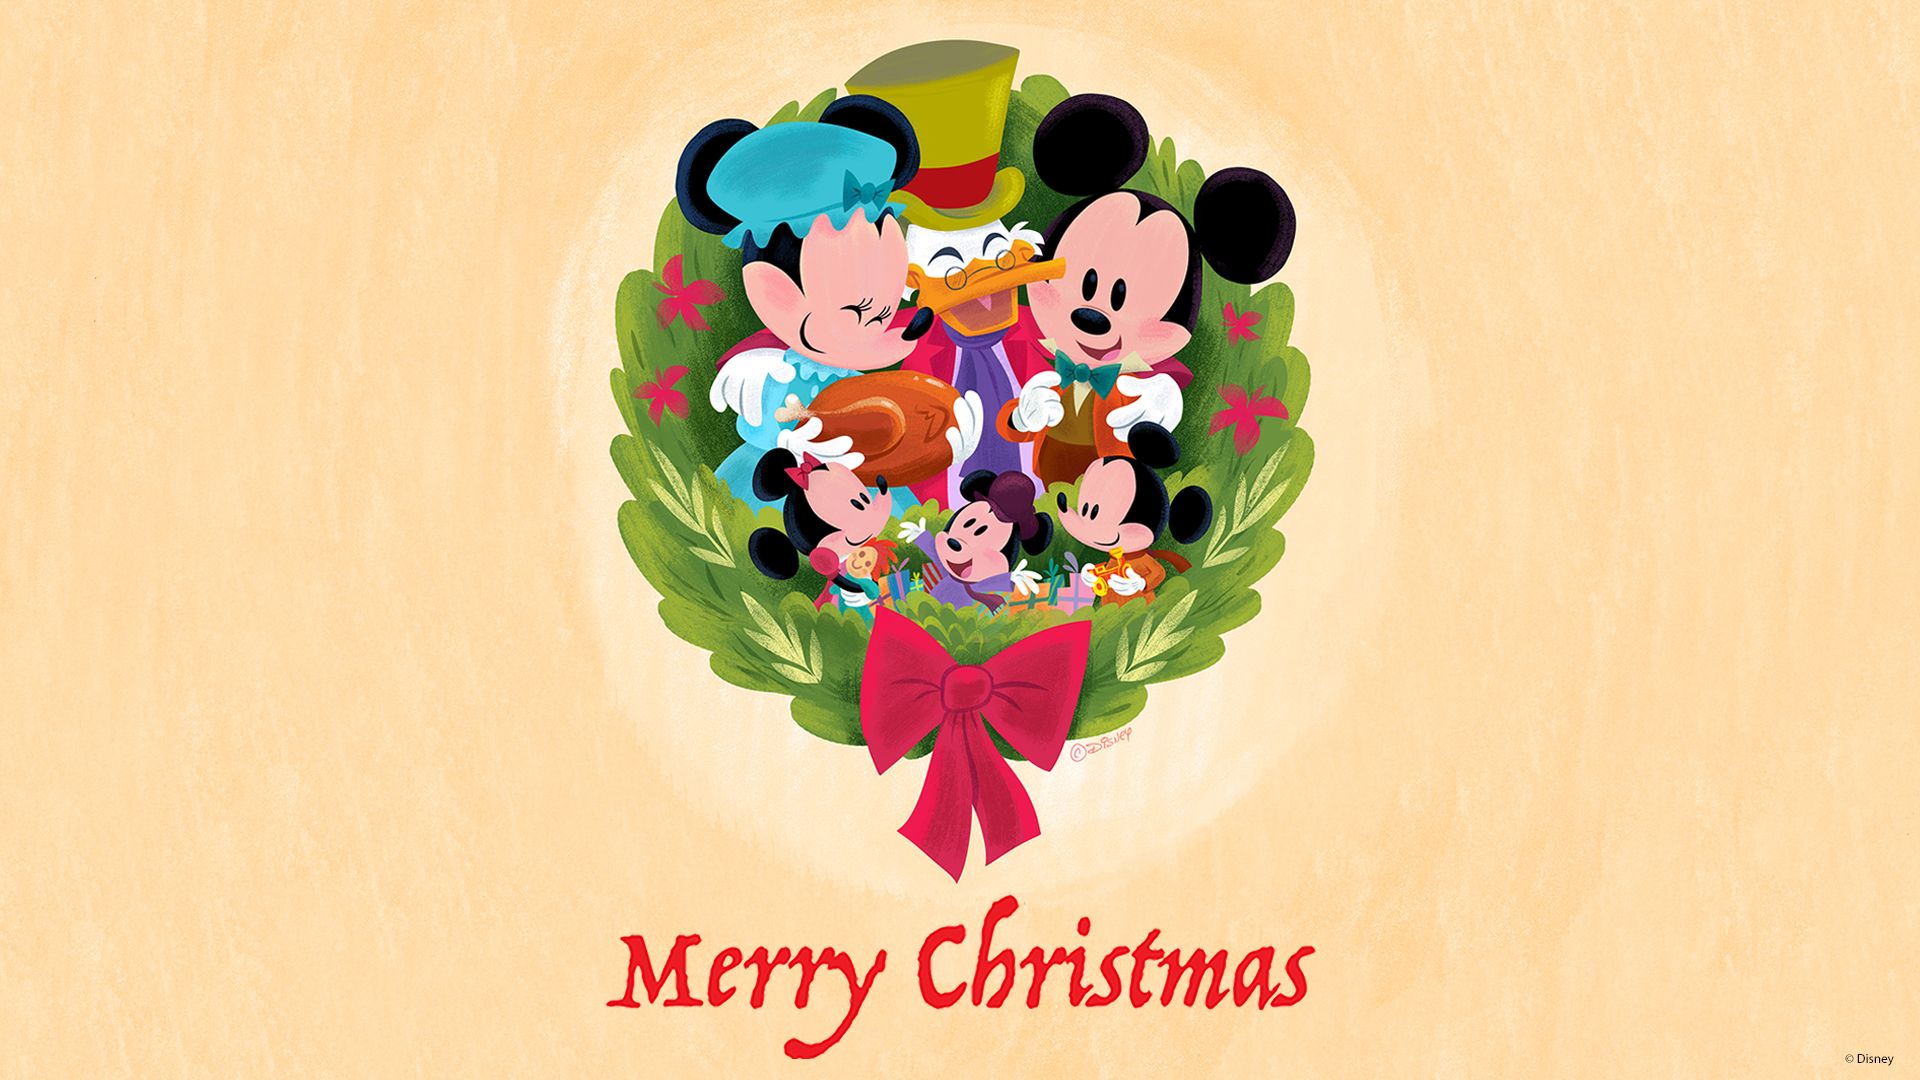 Download These Special Holiday Wallpaper Designed by Disney Artists Now